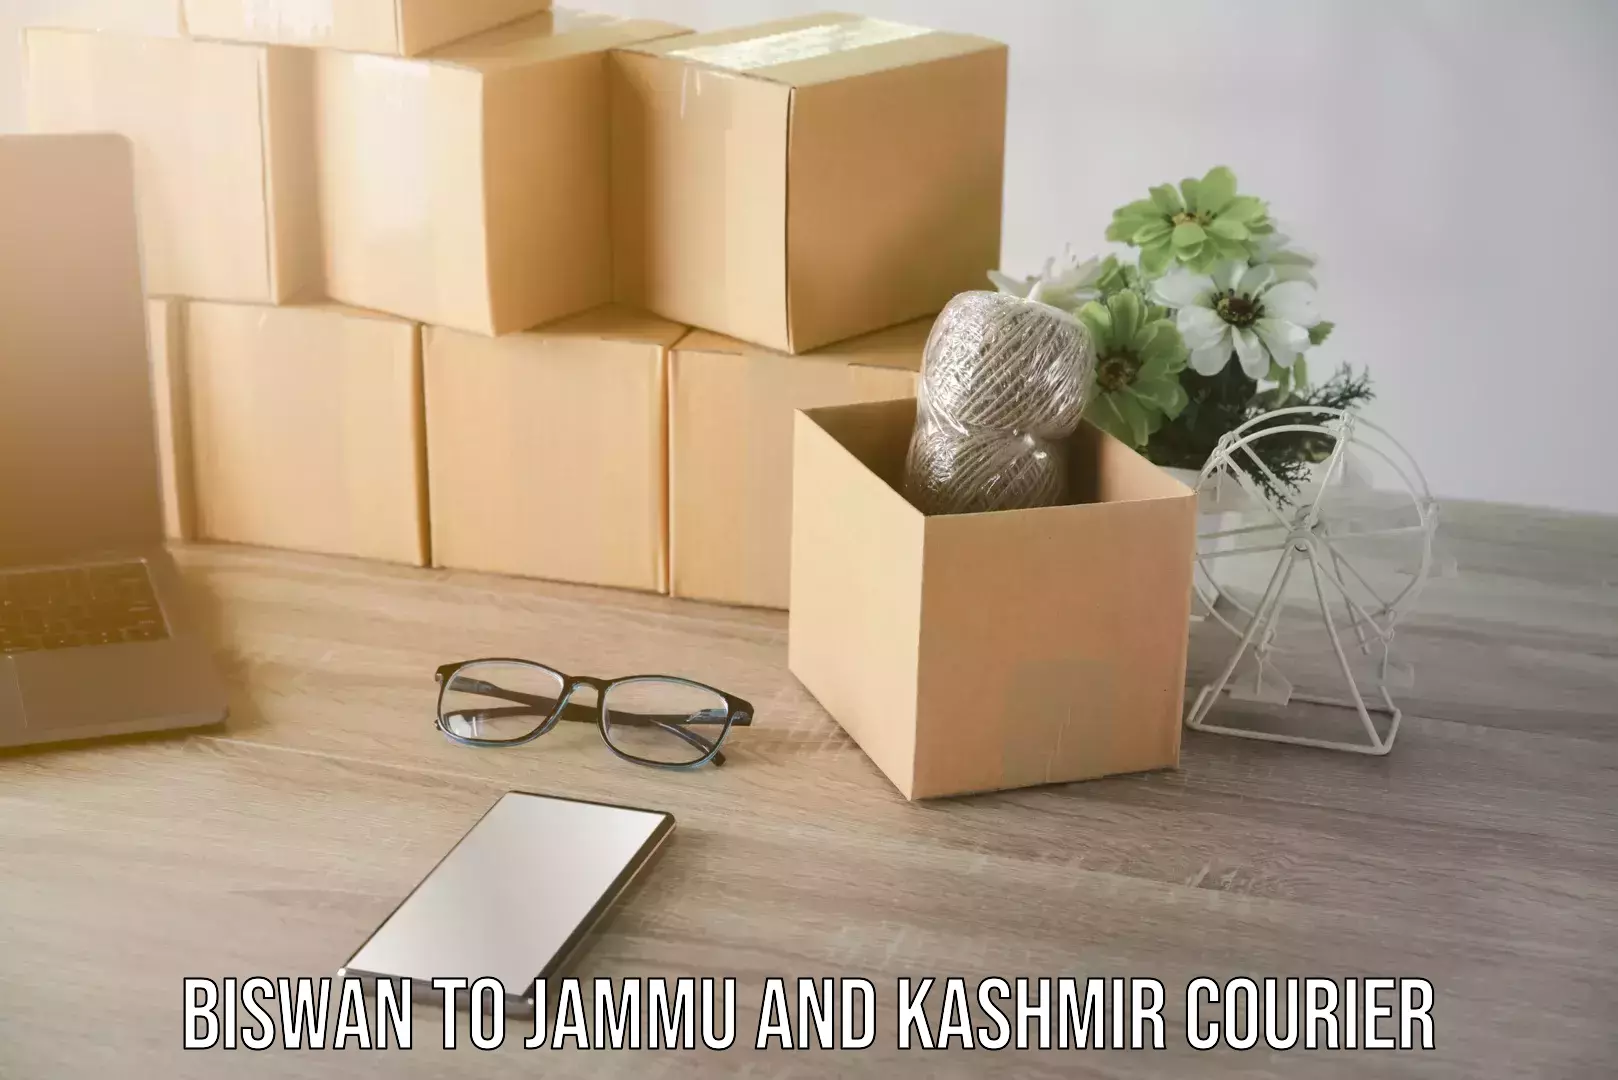 Cash on delivery service Biswan to Jammu and Kashmir